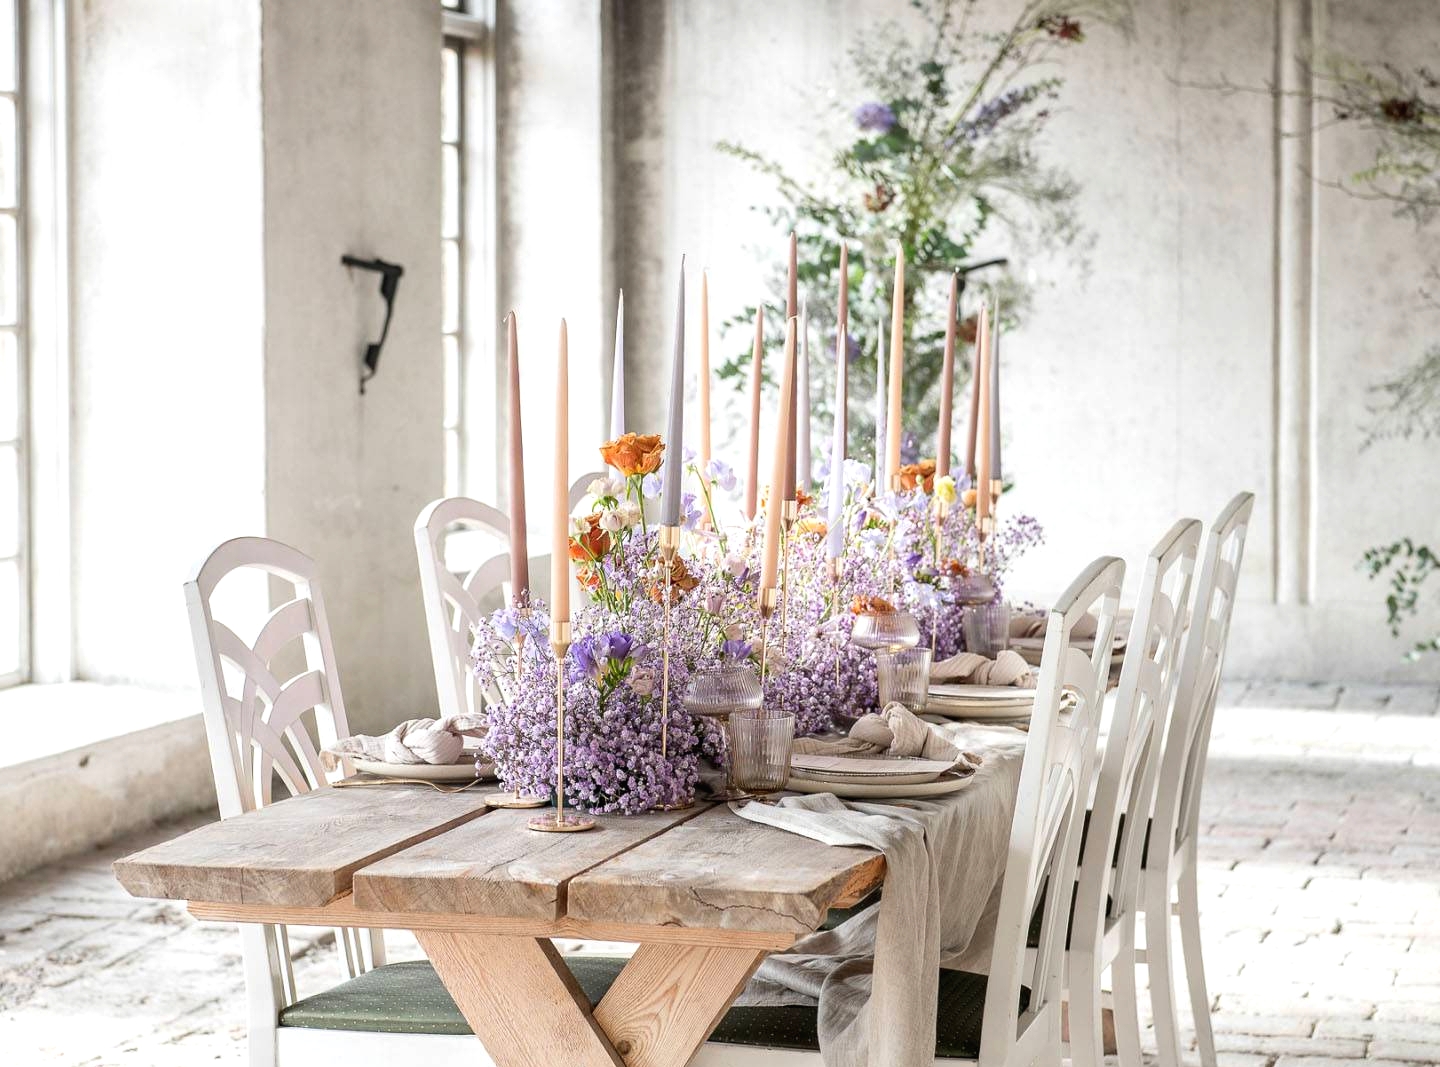 Dreamy romantic wedding inspiration in a Gustavian Manor House in Sweden